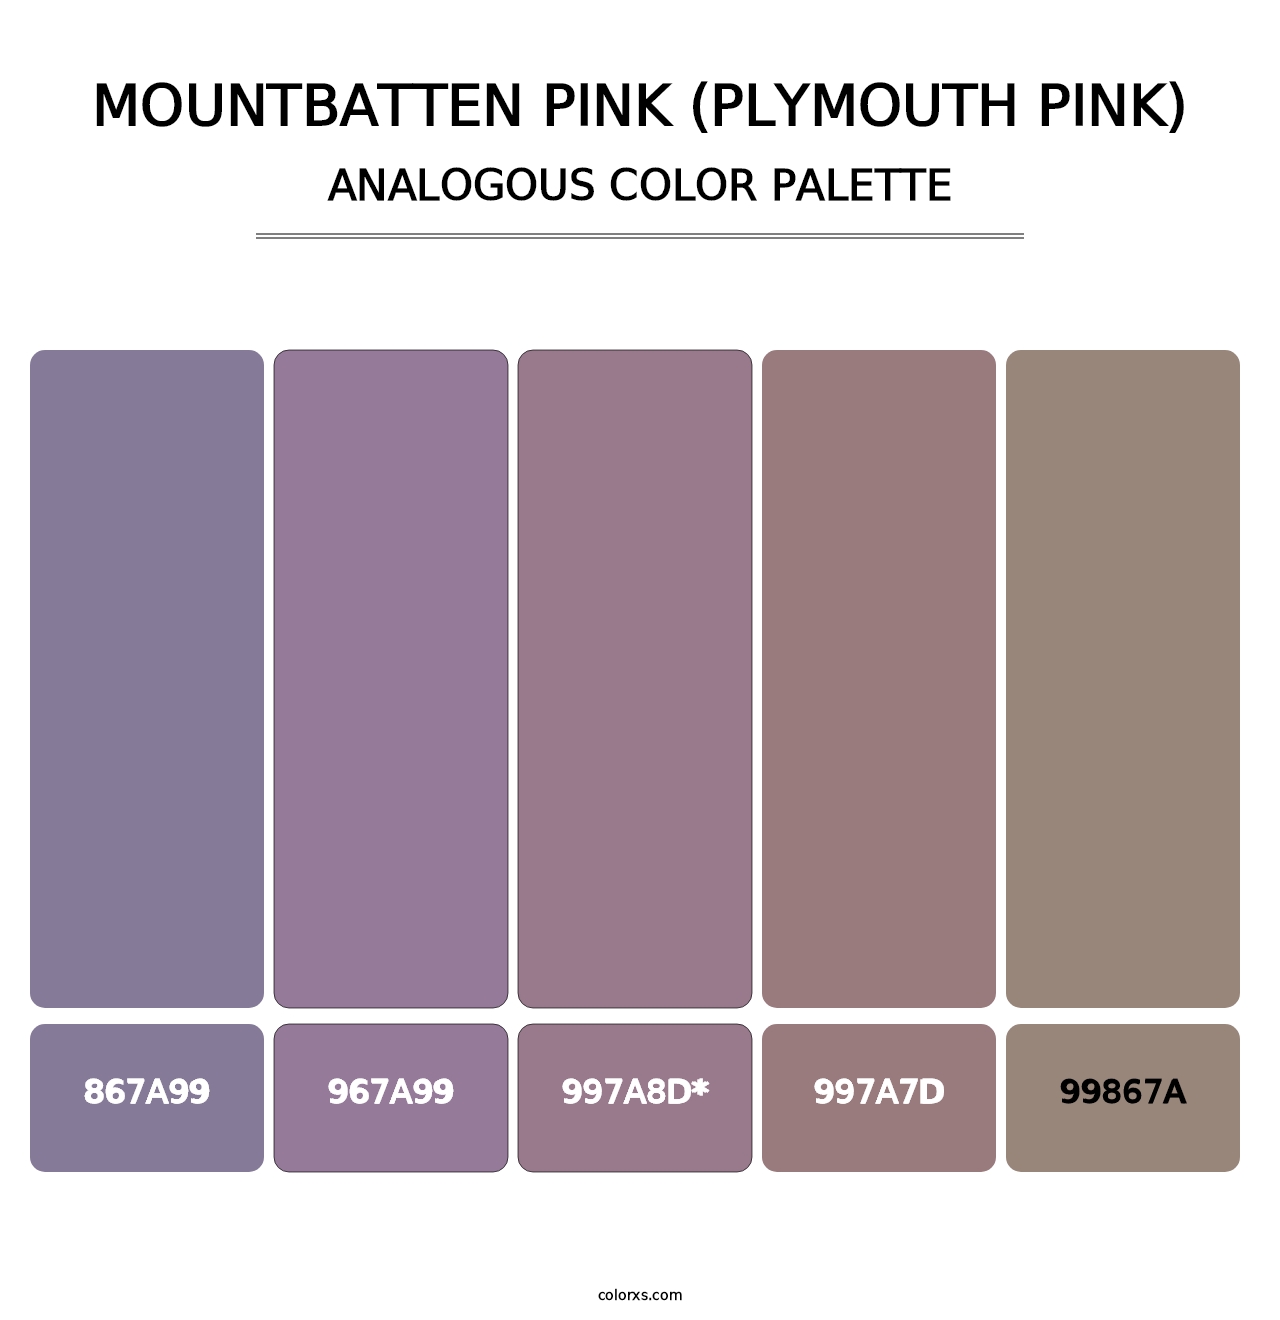 Mountbatten Pink (Plymouth Pink) - Analogous Color Palette